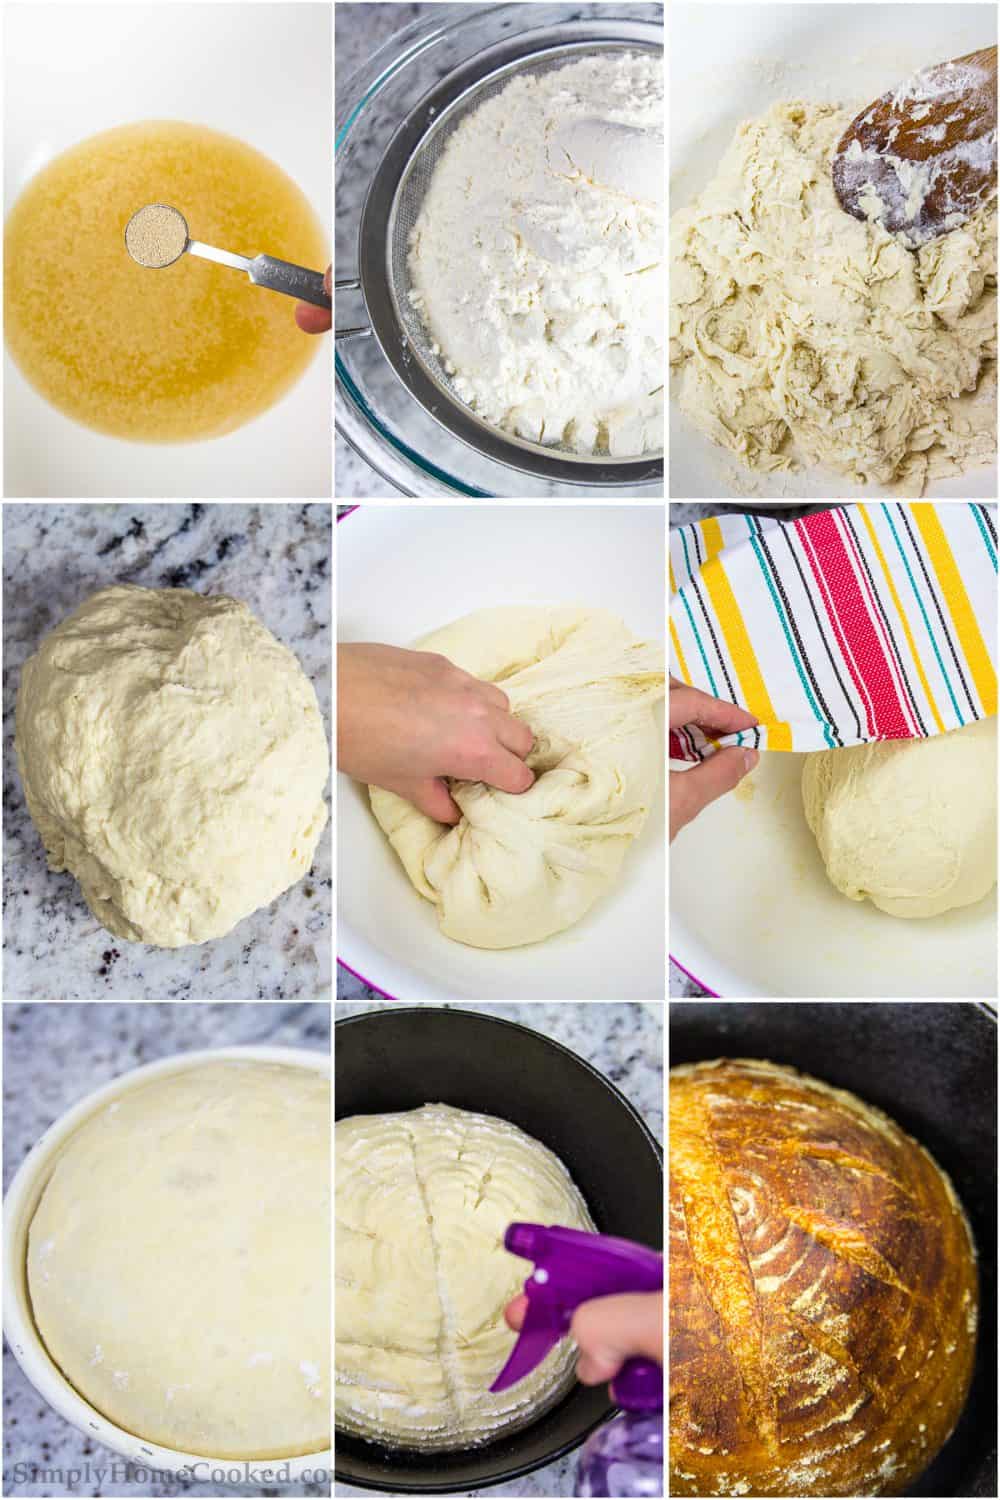 how to make Rustic Bread step by step pictures